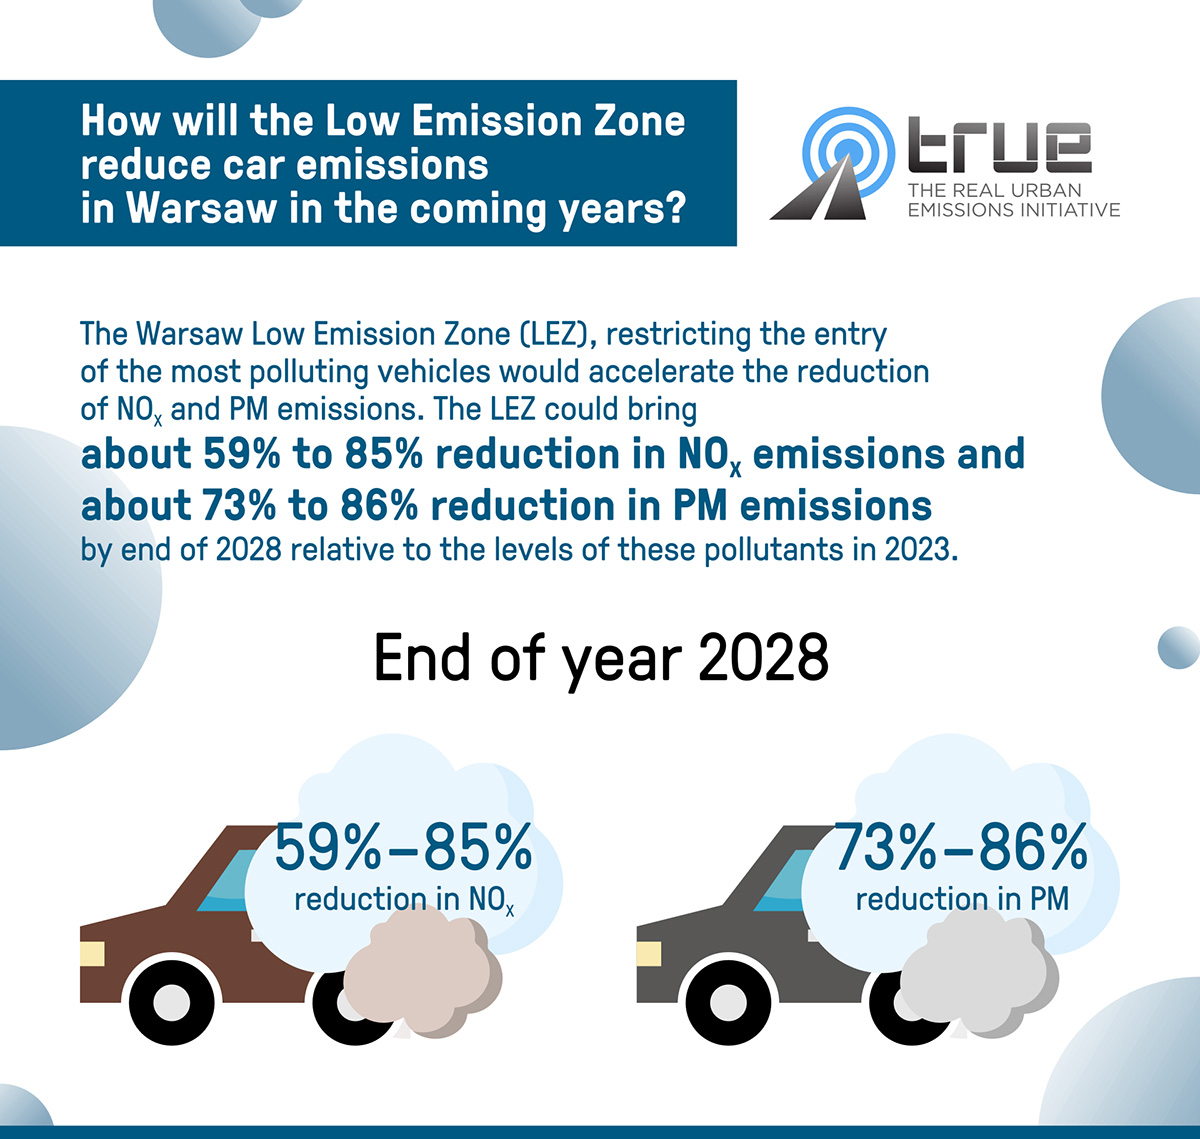 How will the Low Emission Zone reduce car emissions in Warsaw in the coming years?